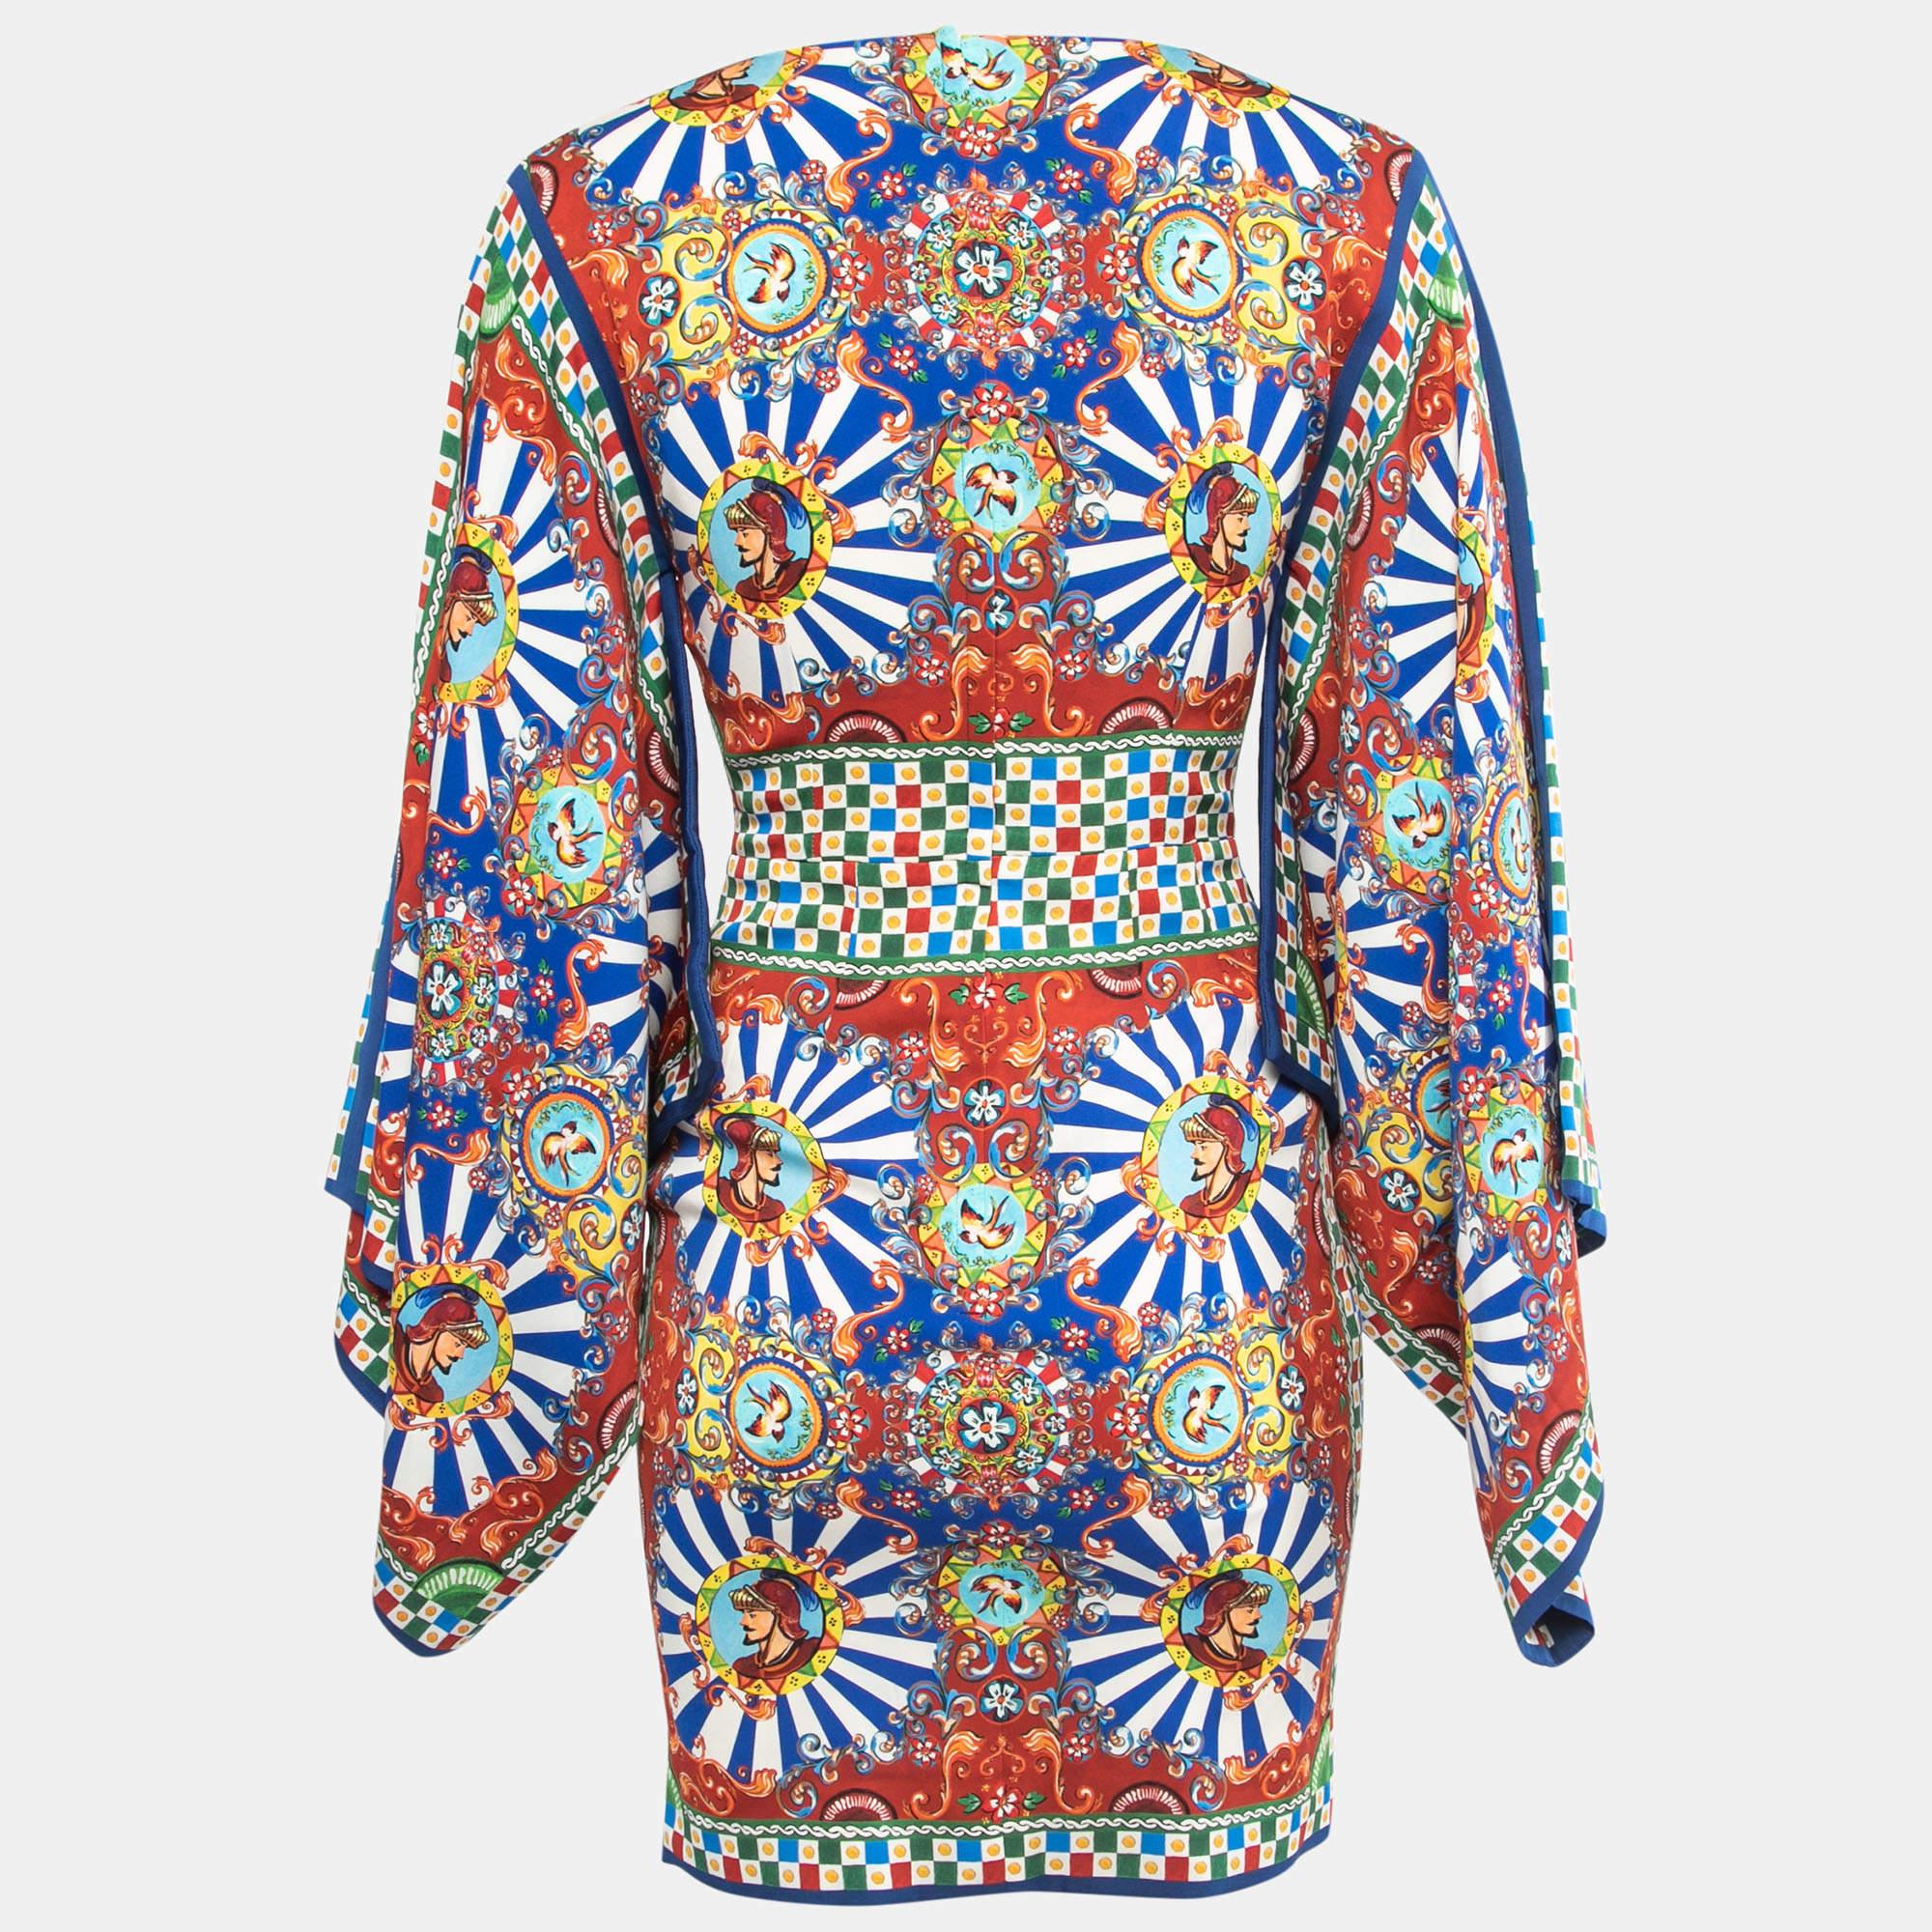 The Dolce & Gabbana dress is a vibrant and eye-catching piece. Made from luxurious silk, it features a colorful print that adds a playful and artistic touch. The dress has wide kimono sleeves, giving it a relaxed and elegant look, while the short